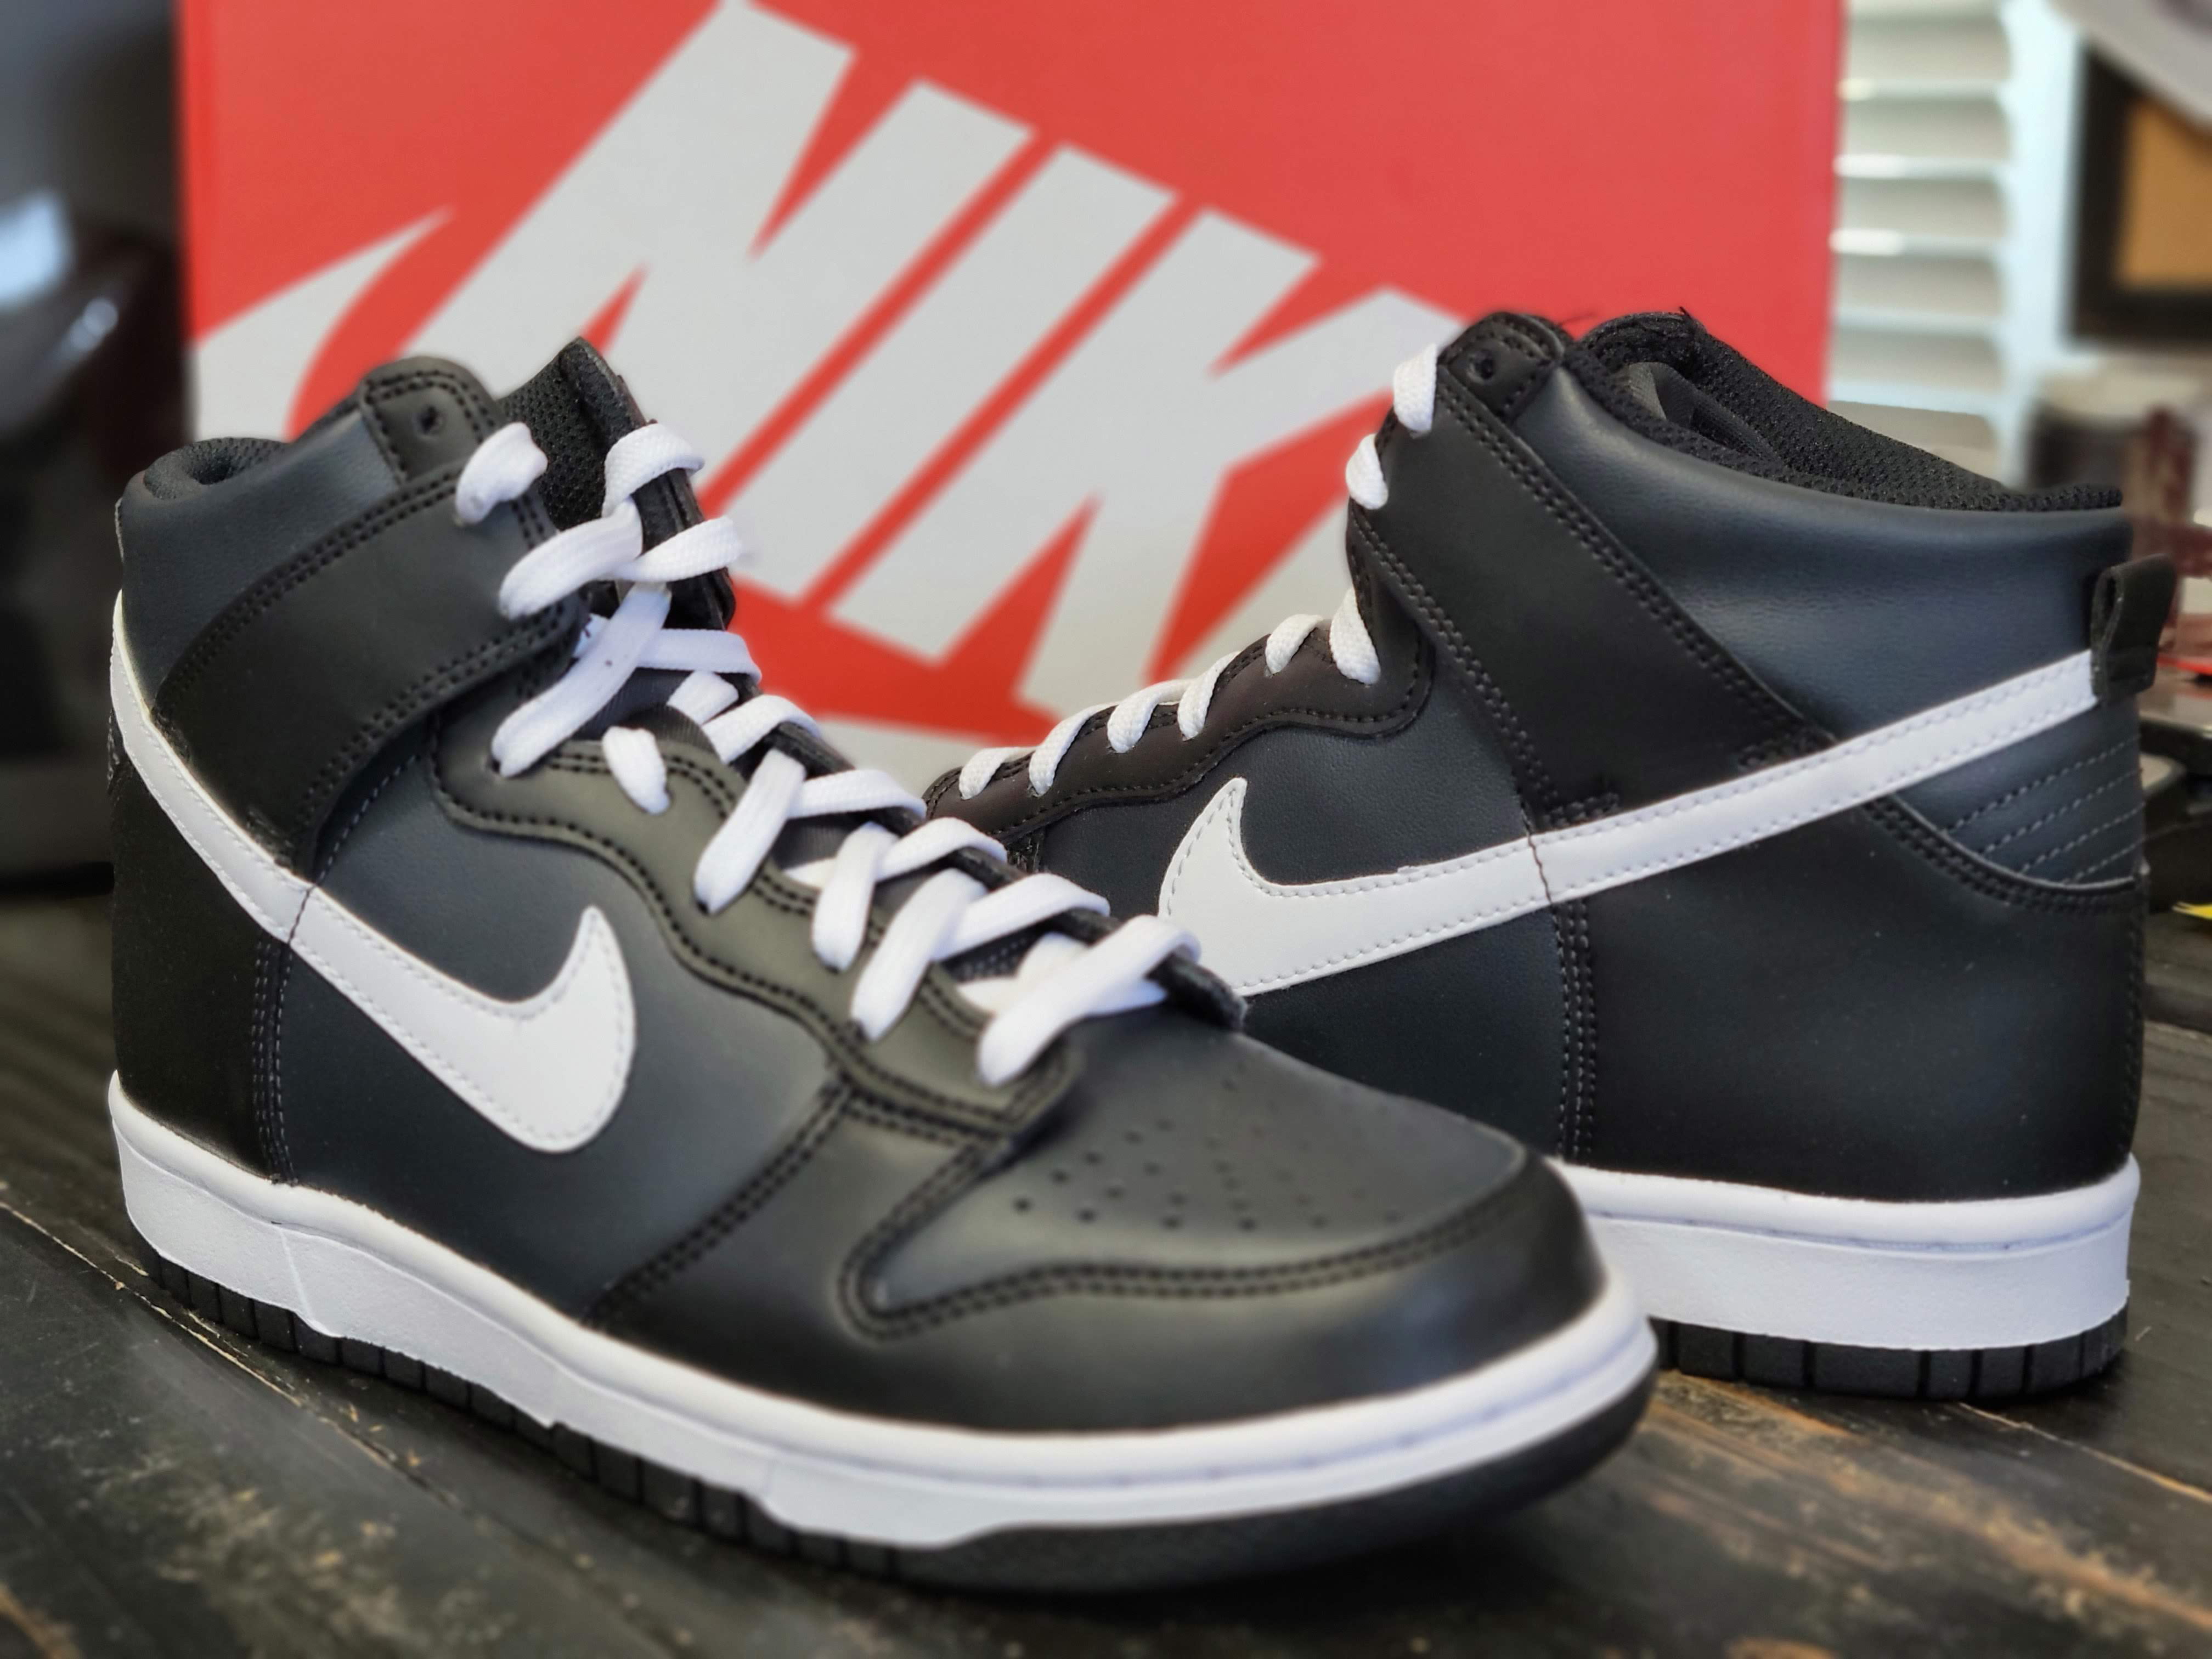 Nike Dunk High Anthacite/White-Black Sneakers DH9751-001 GS Kid 6.5 ...